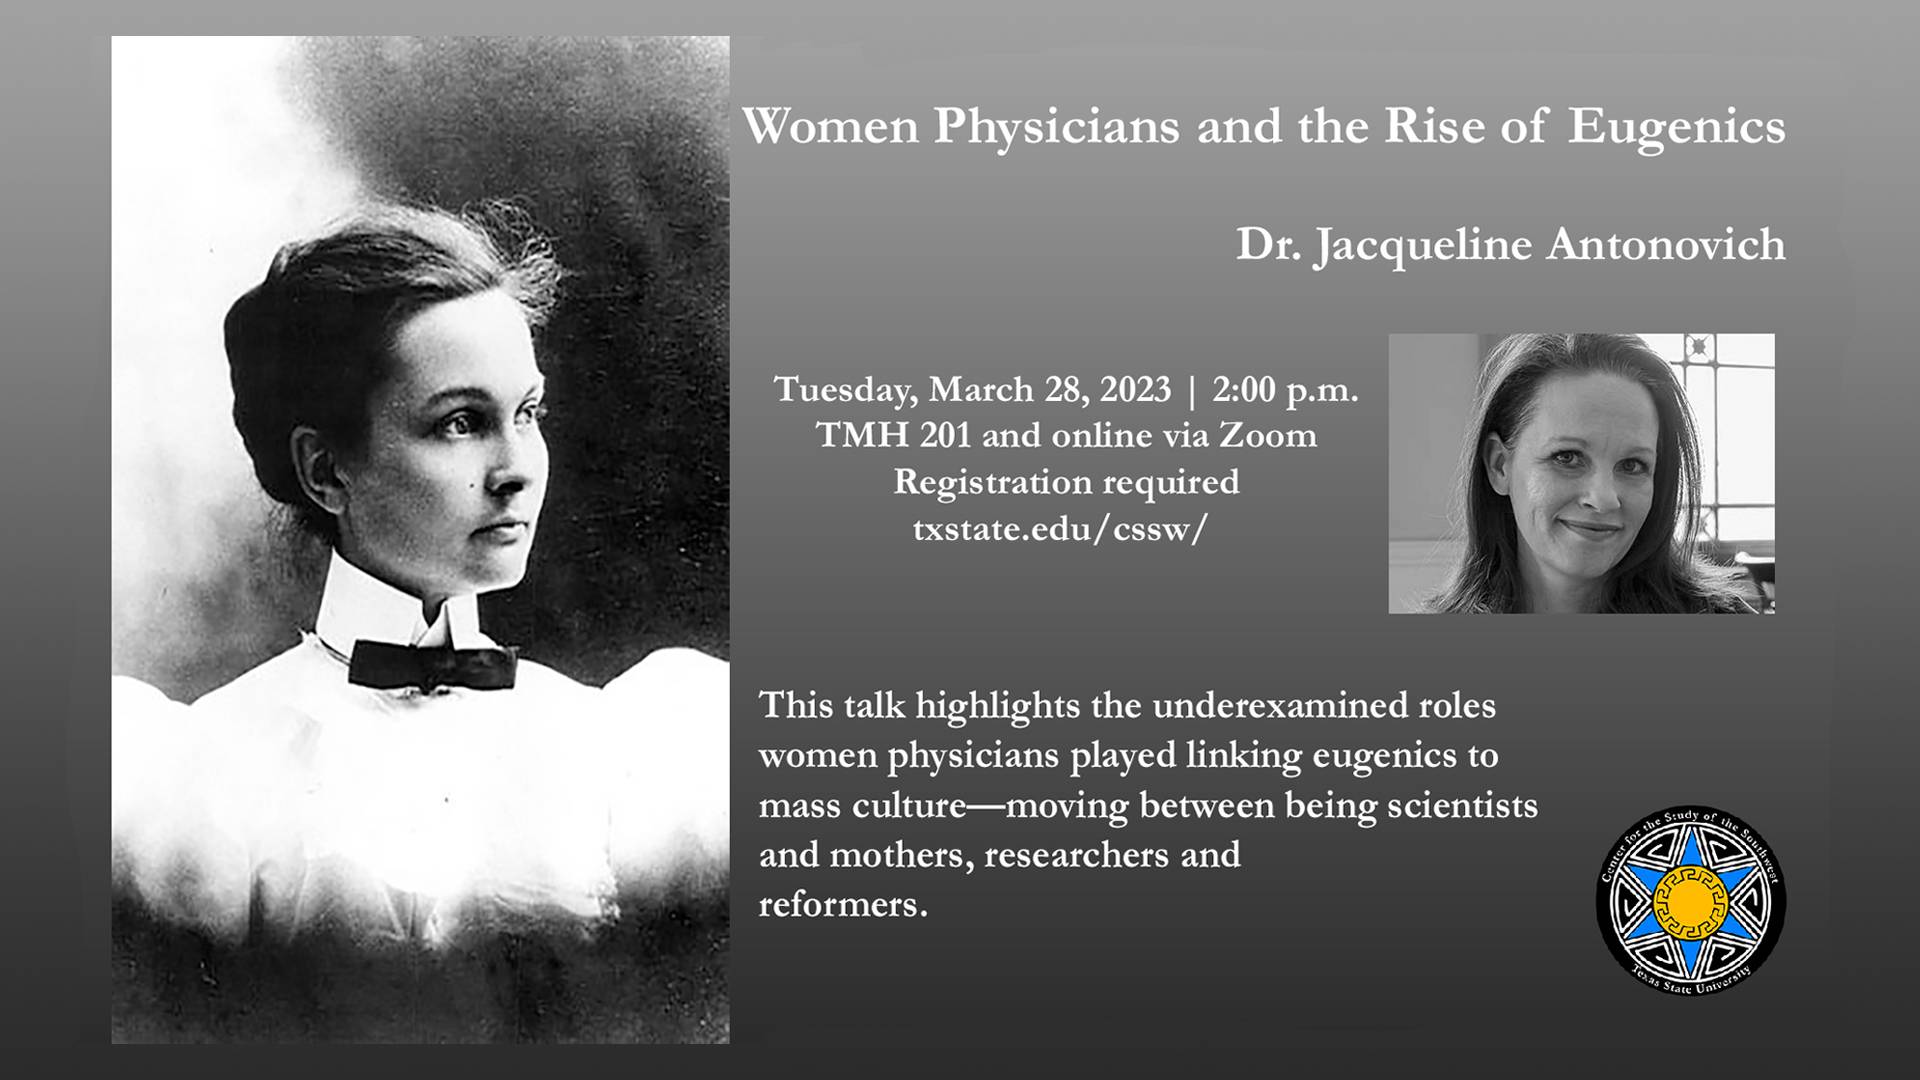 Women Physicians and the Rise of Eugenics